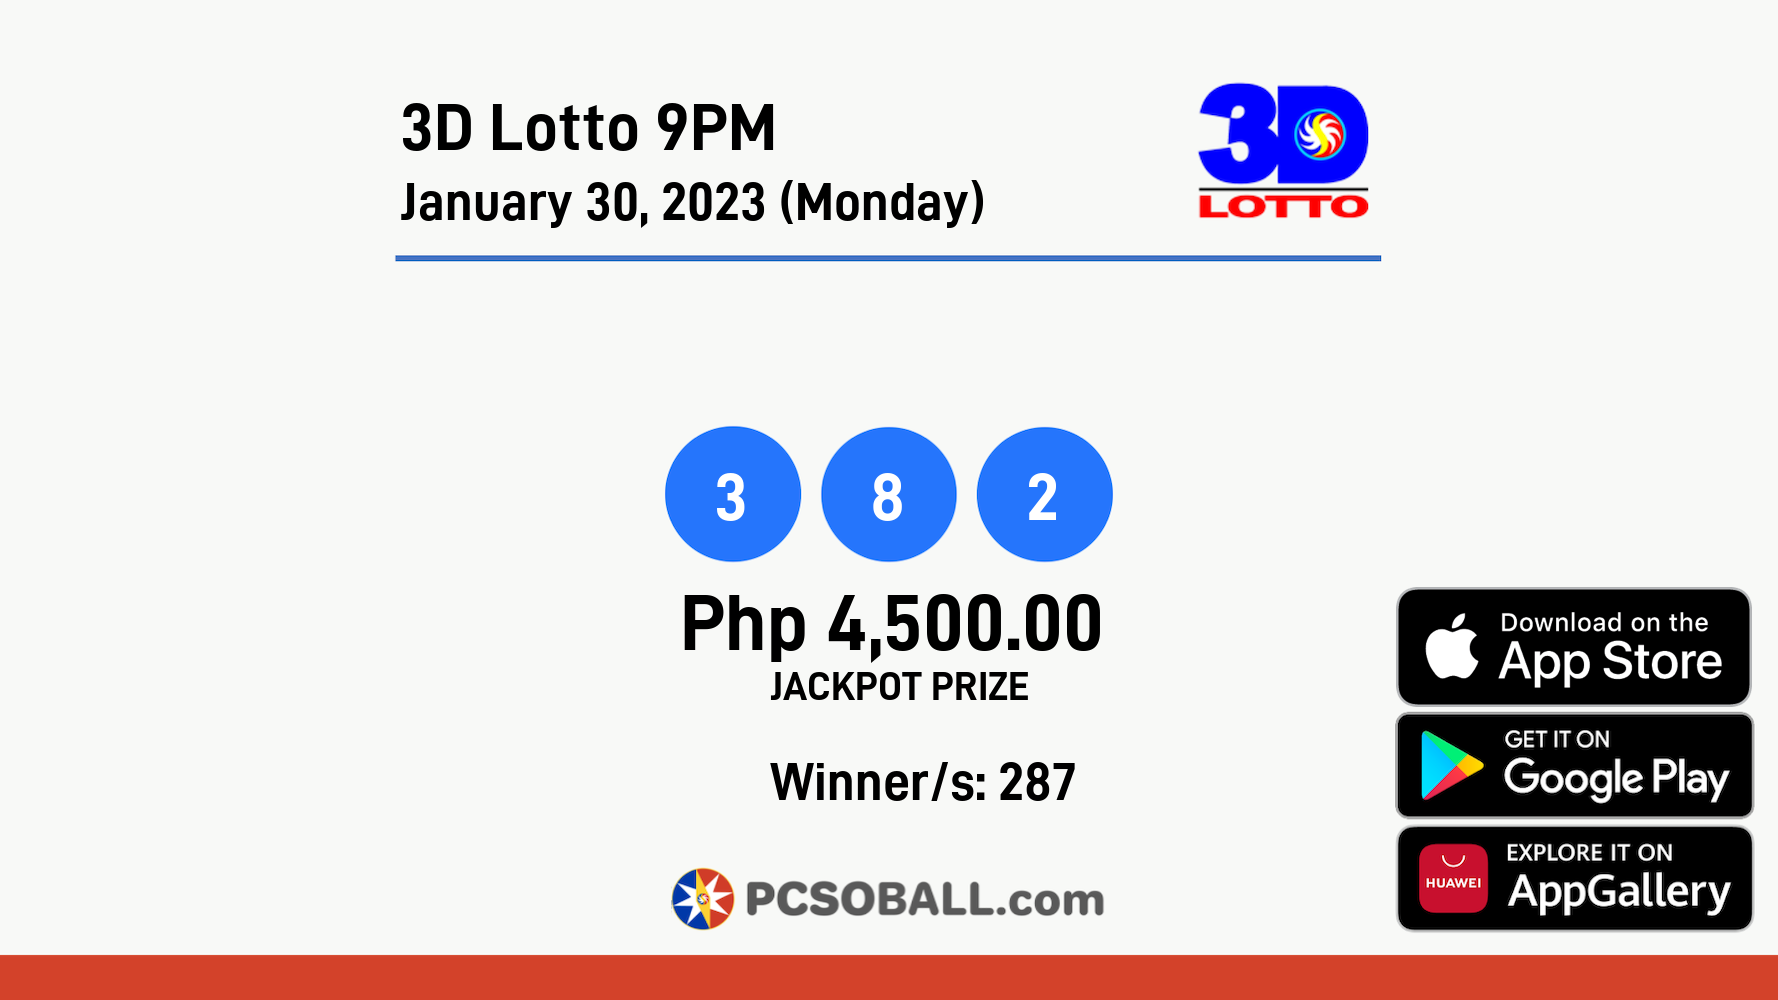 3D Lotto 9PM January 30, 2023 (Monday) Result